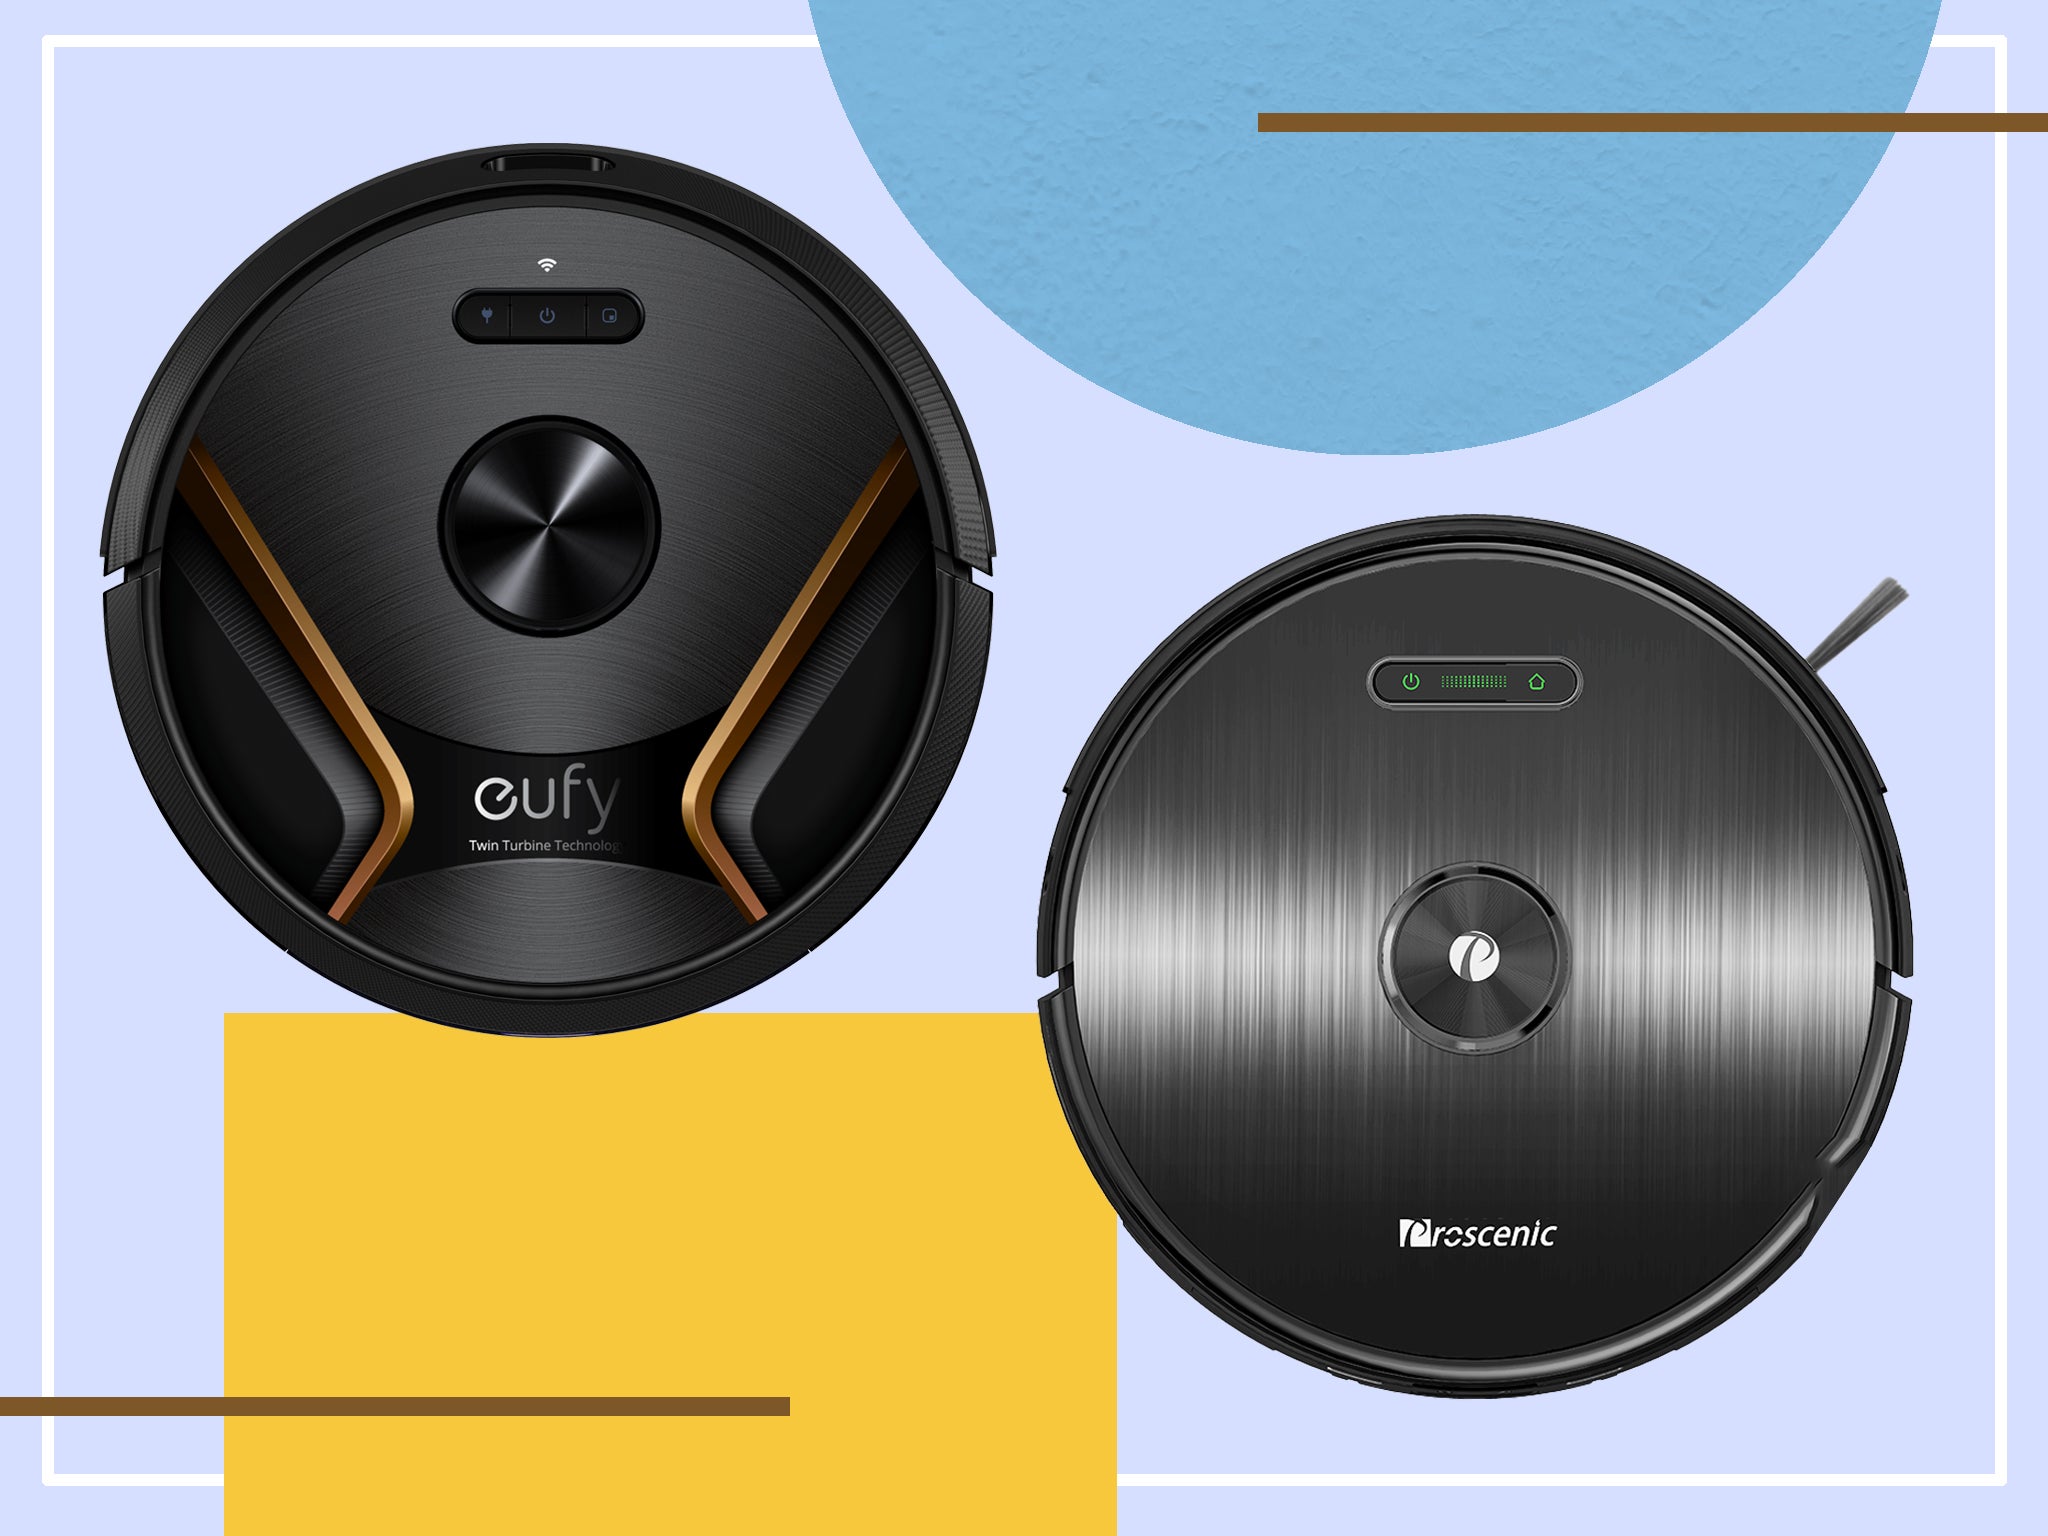 Robot Vacuum Cleaner Robotic Vacuum Cleaning Dust and Pet Hair Carpet and All Floor Types Strong Suction Route Planning on Hard Floor 